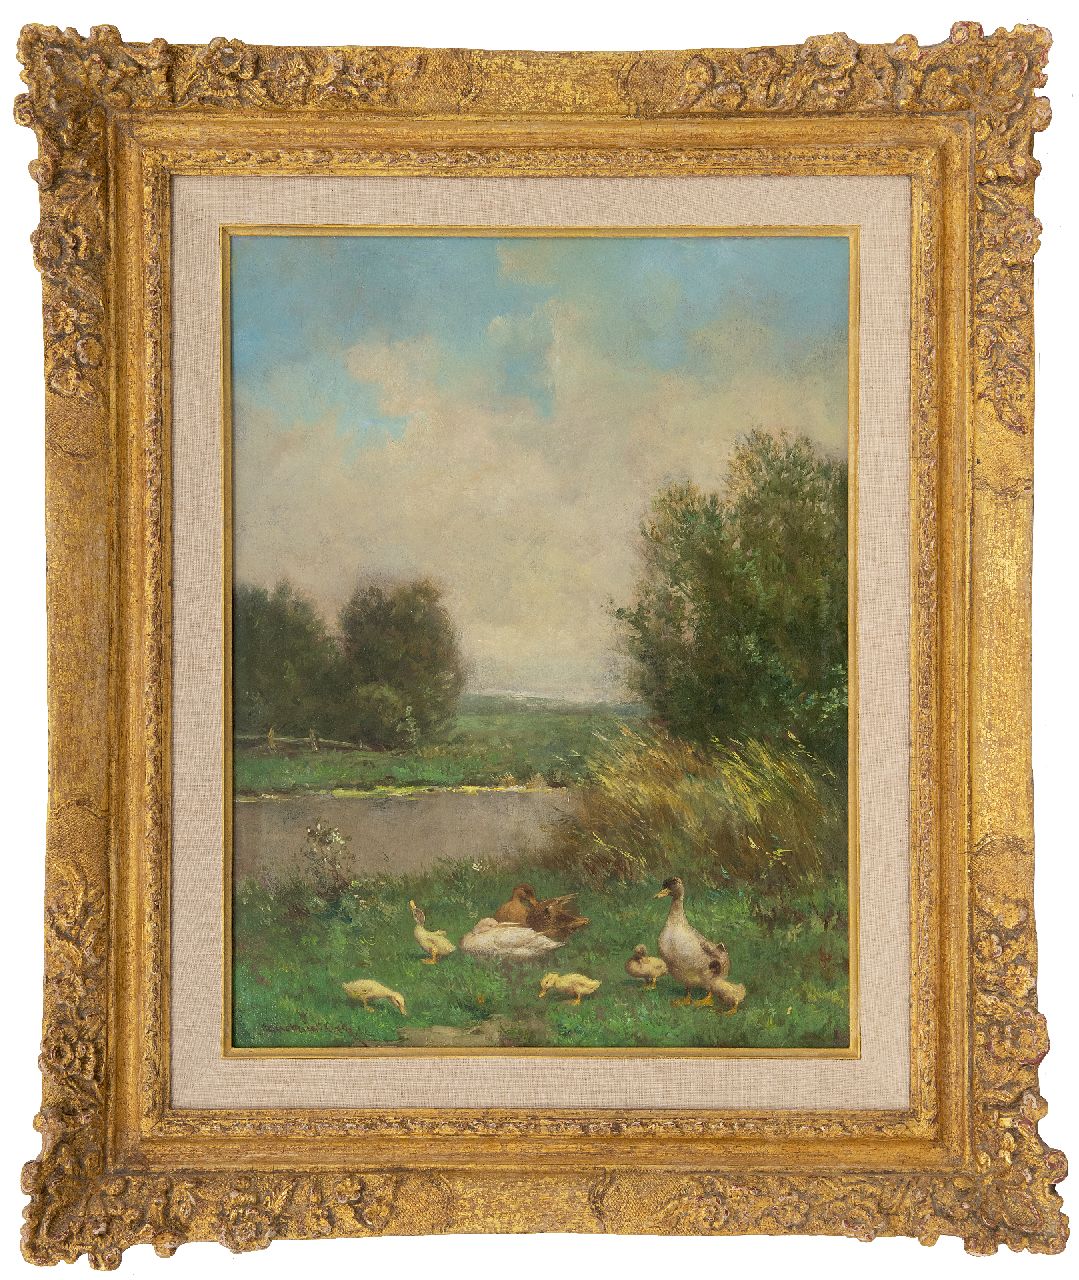 Artz C.D.L.  | 'Constant' David Ludovic Artz | Paintings offered for sale | Ducks and ducklings by a ditch, oil on panel 39.9 x 30.1 cm, signed l.l.